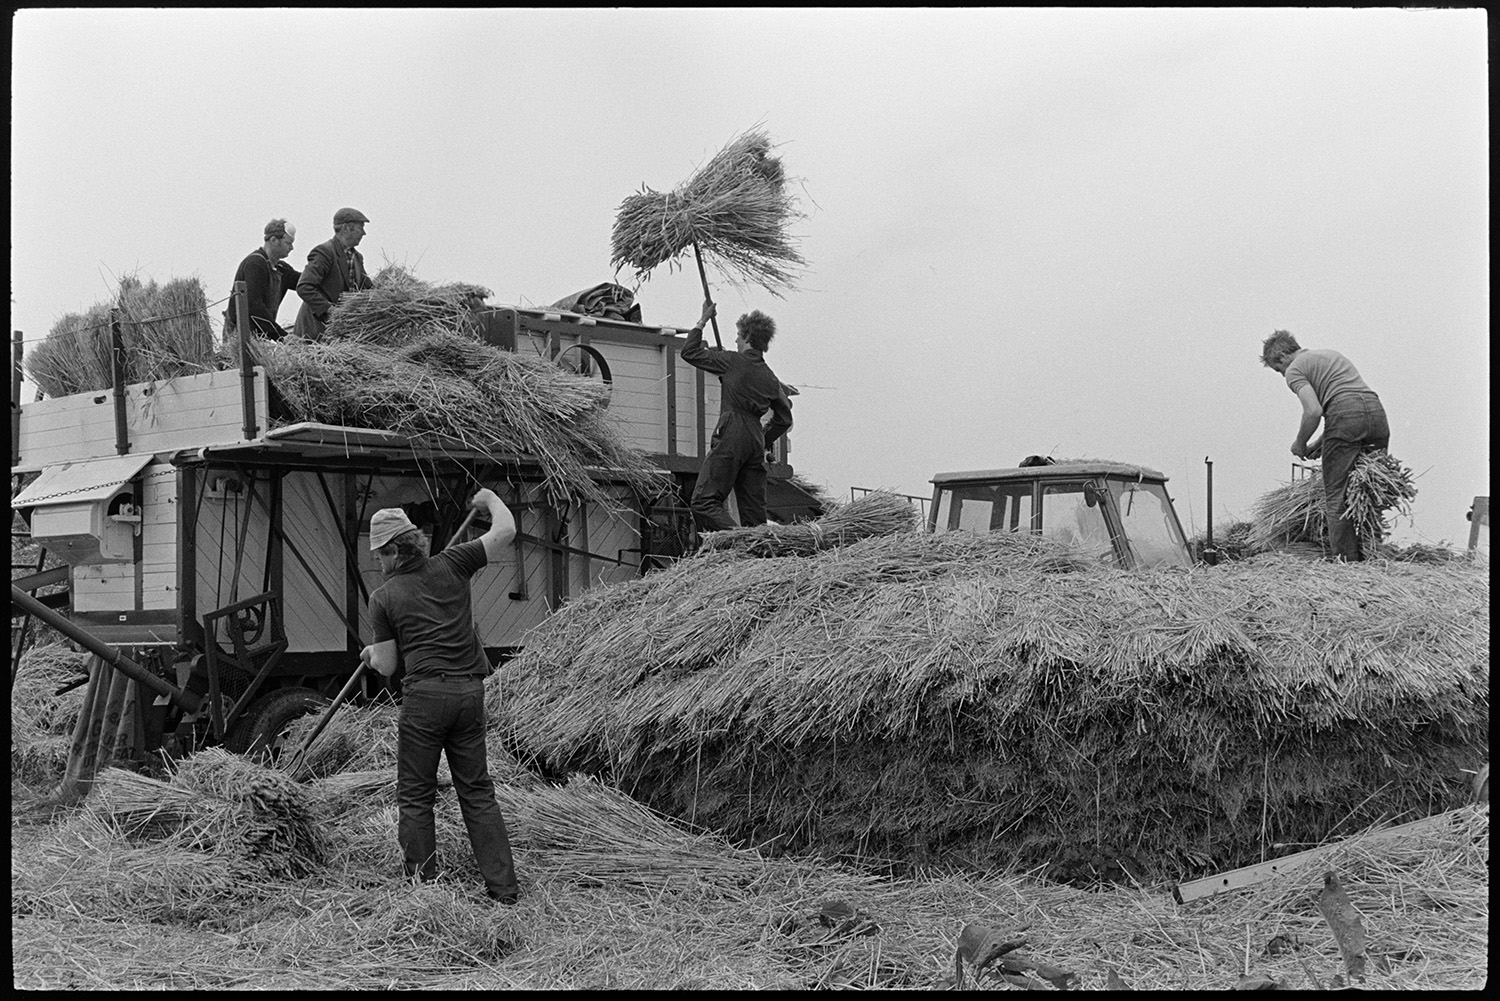 Reed comber at work, pile of ropes and spars. 
[Men dismantling a wheat rick and loading the reed into a reed comber, using pitchforks, in a field at Westacott Barton, Riddlecombe.]